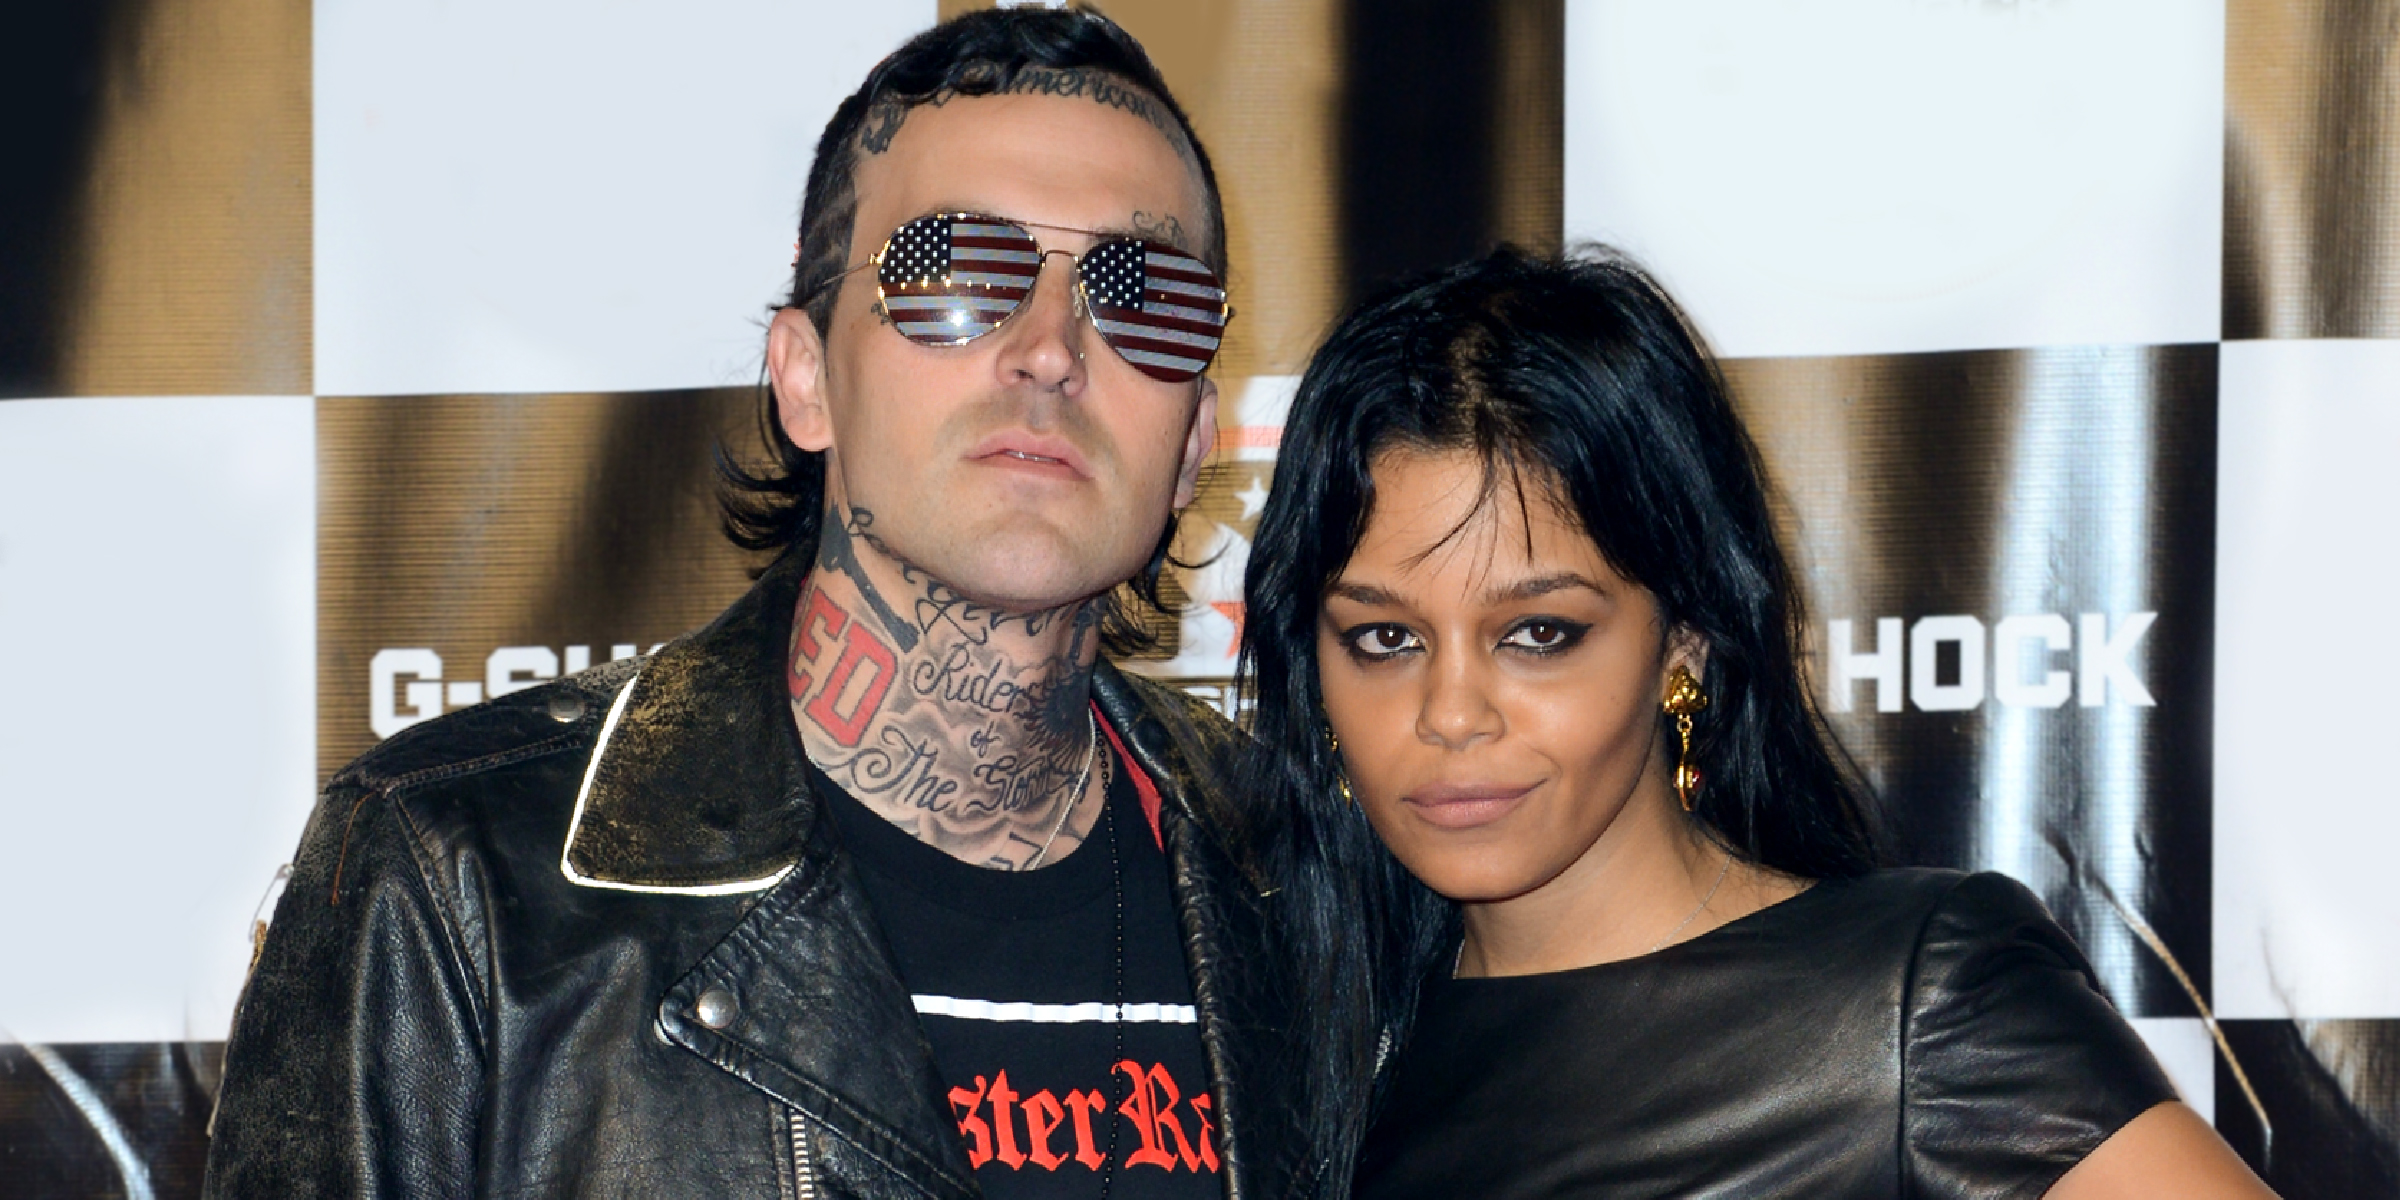 Yelawolf and Fefe Dobson | Source: Getty Images